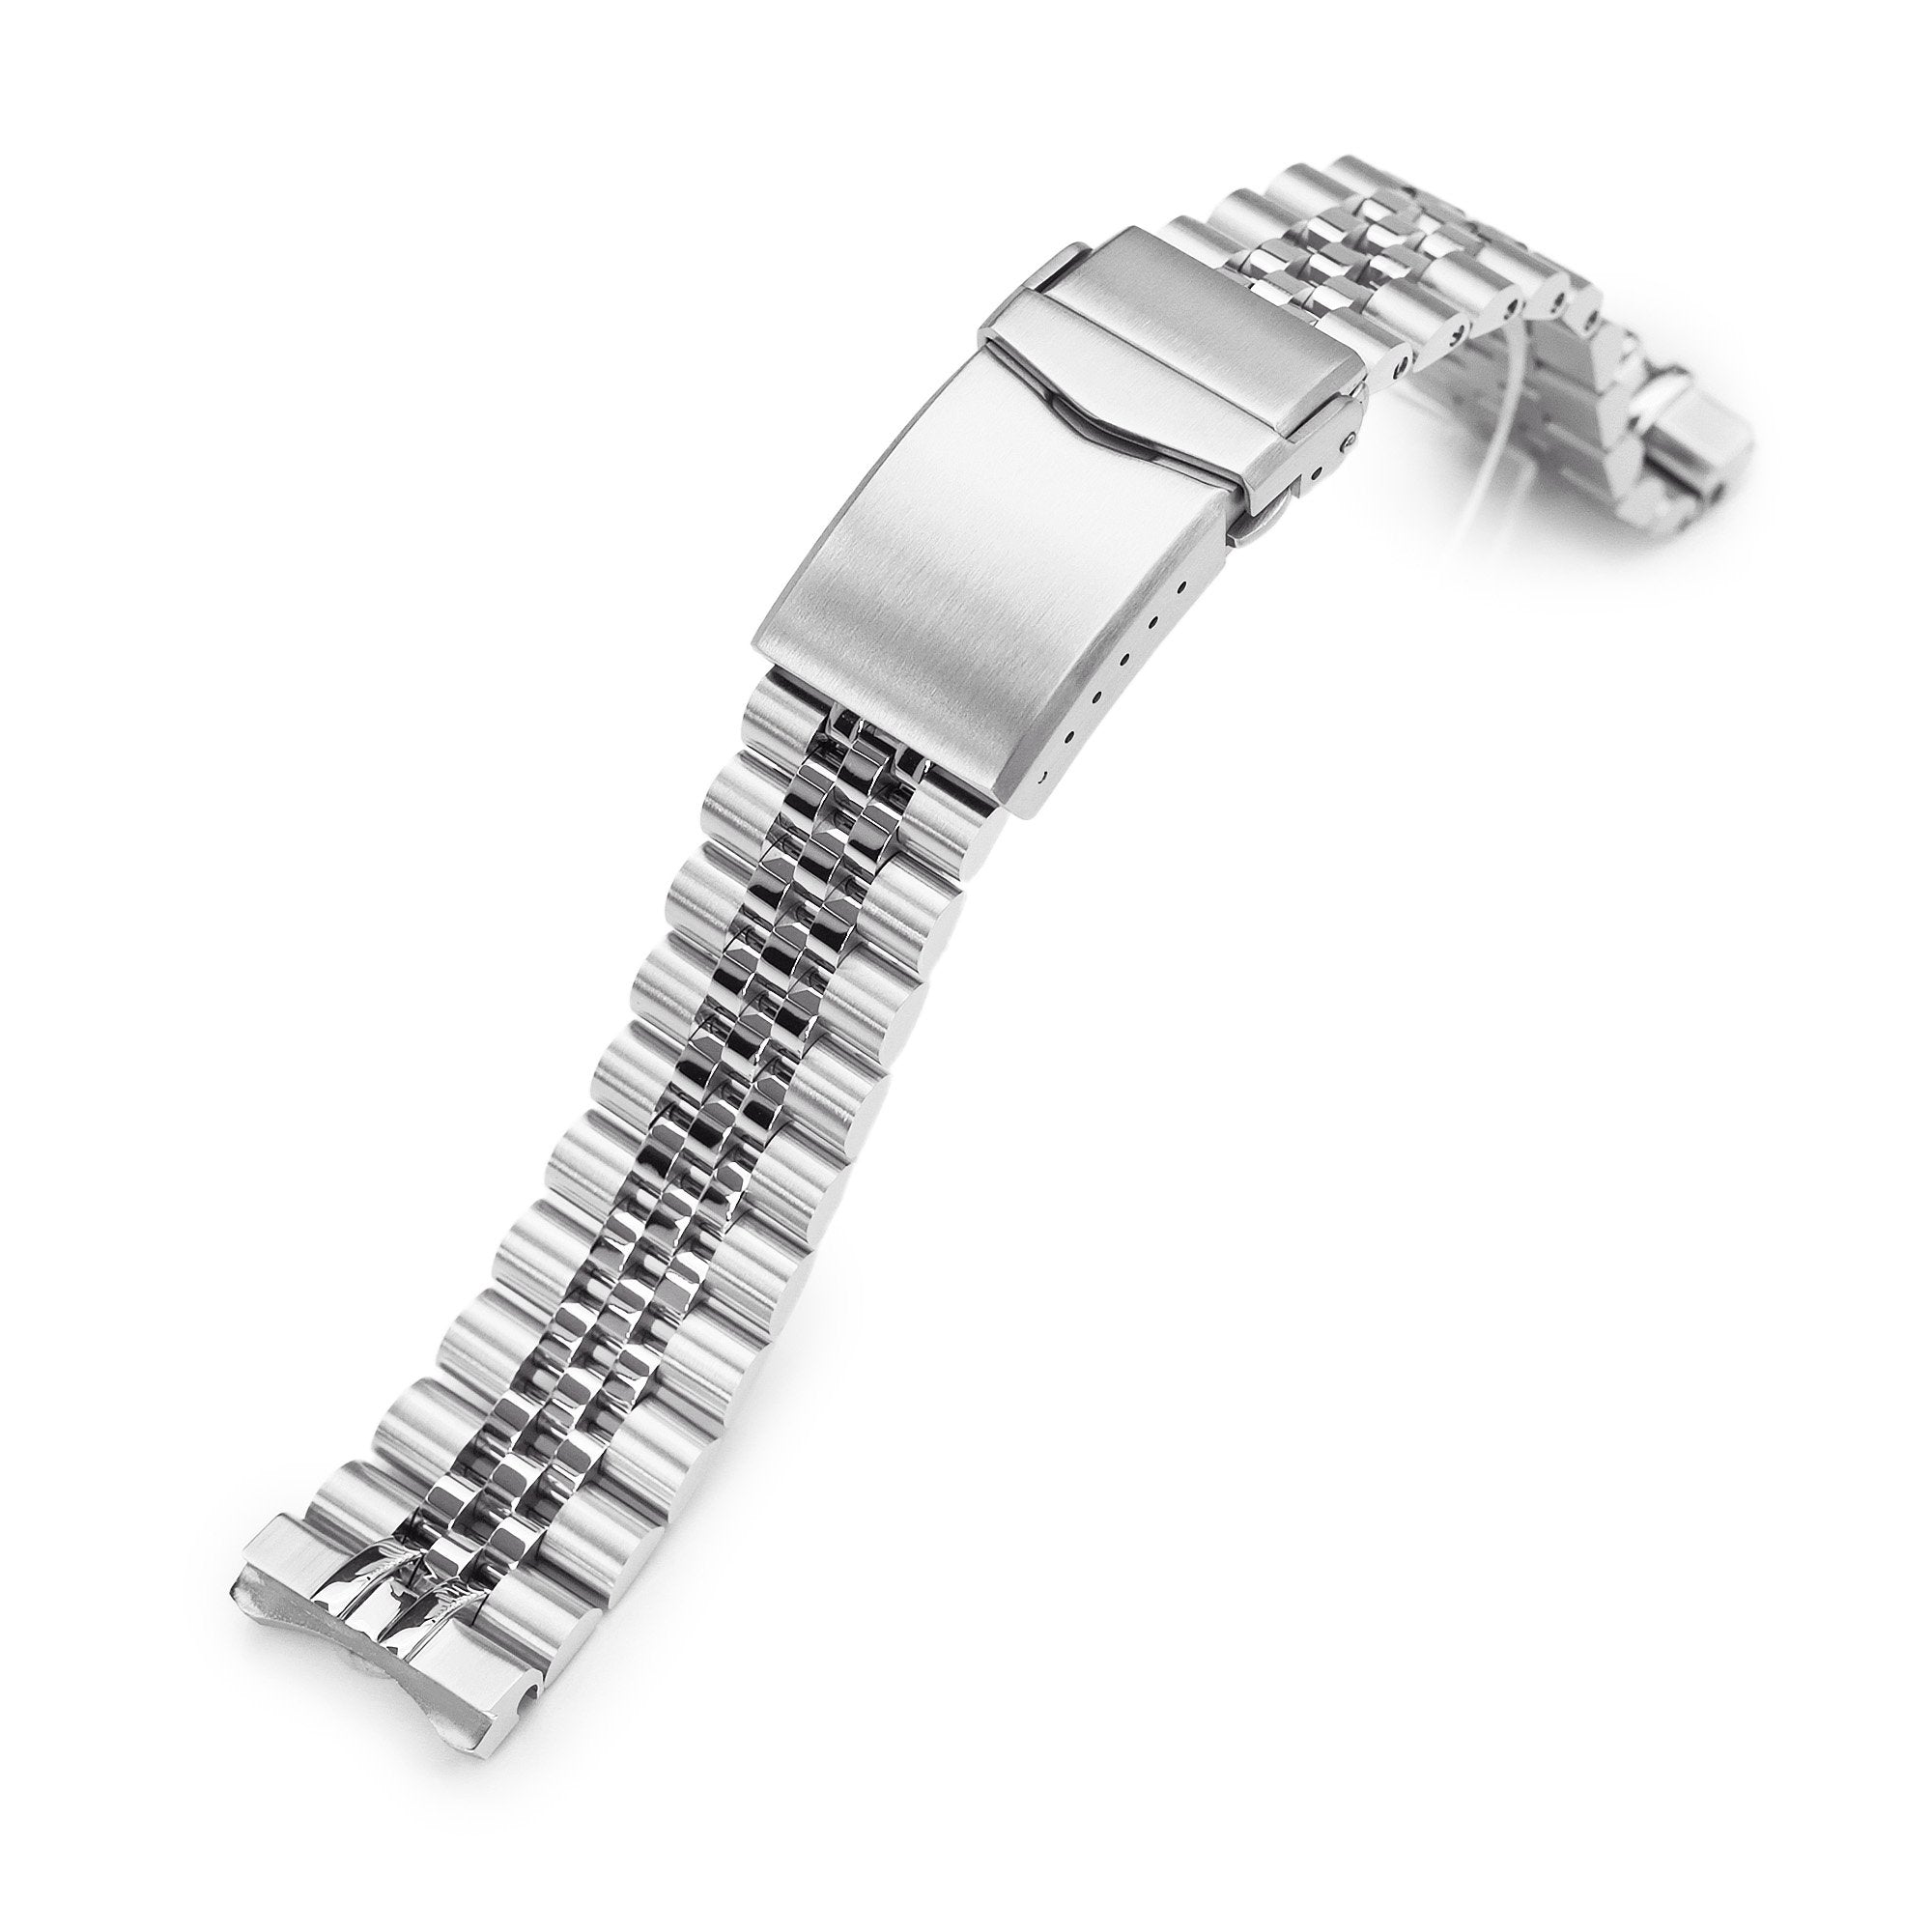 20mm Super-J Louis 316L Stainless Steel Watch Band for Seiko SPB143 63Mas 40.5mm, Brushed V-Clasp Strapcode Watch Bands